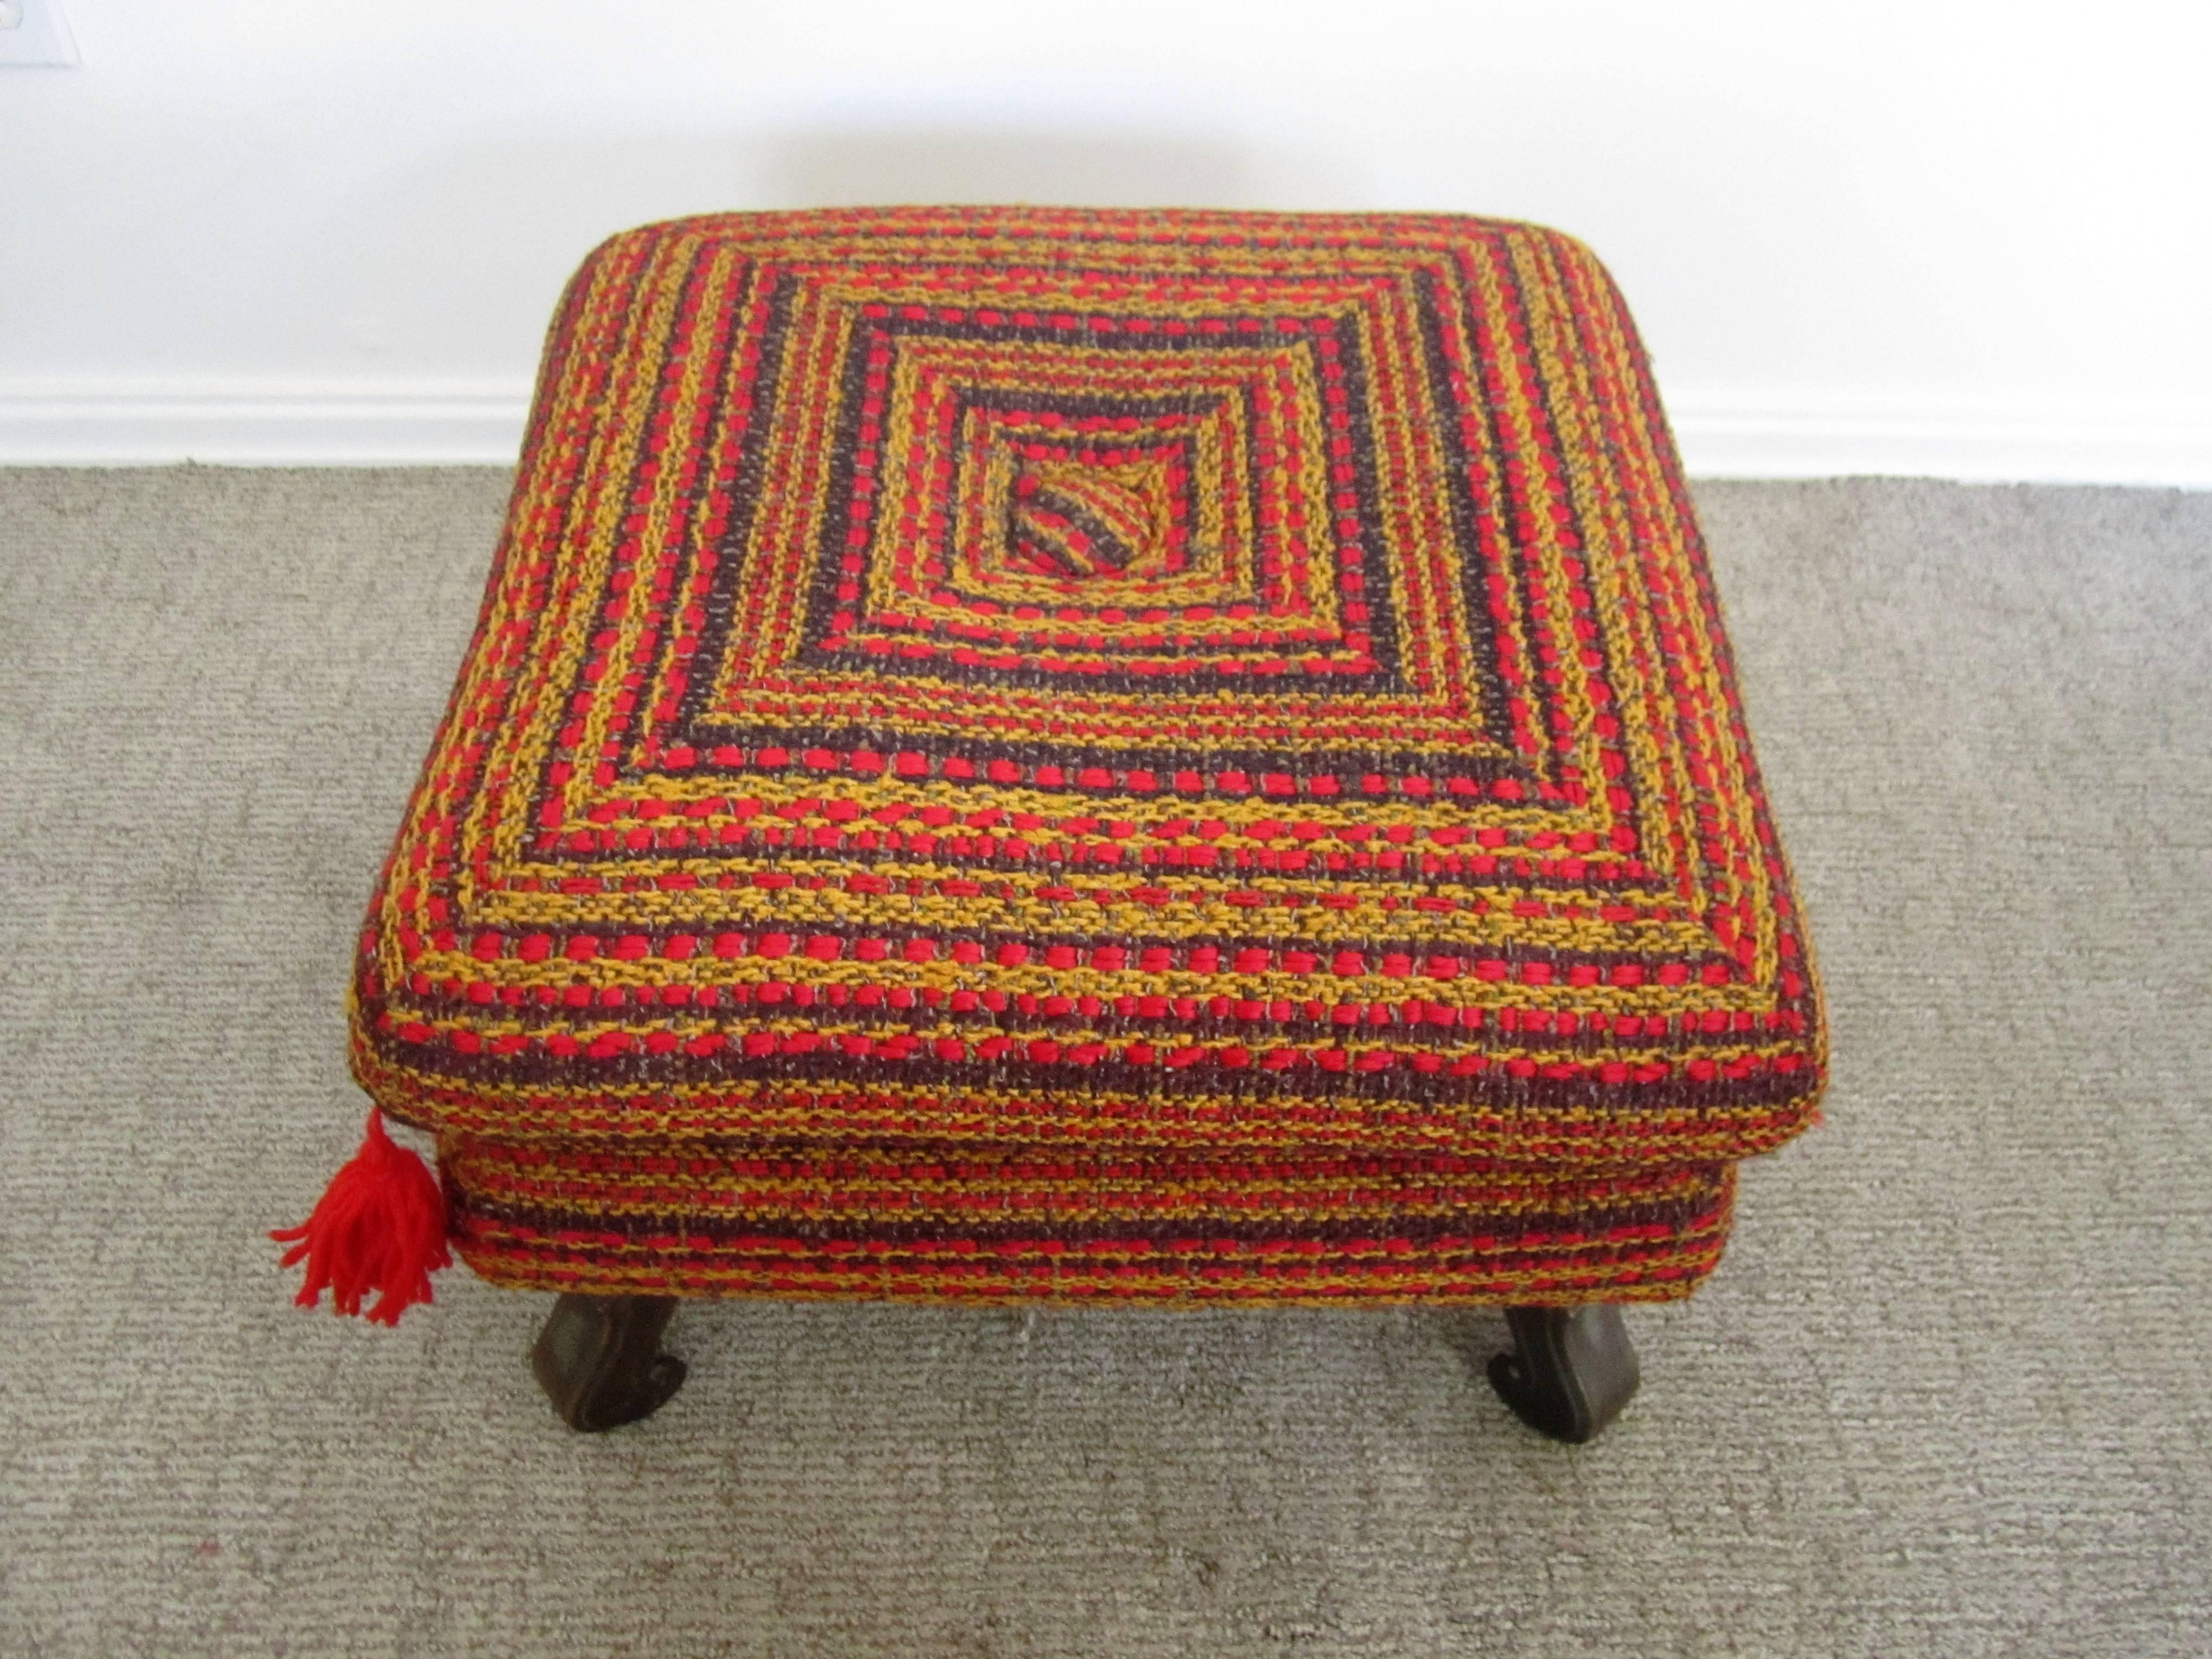 Midcentury Colorful Ottoman, Bench, or Stool 3